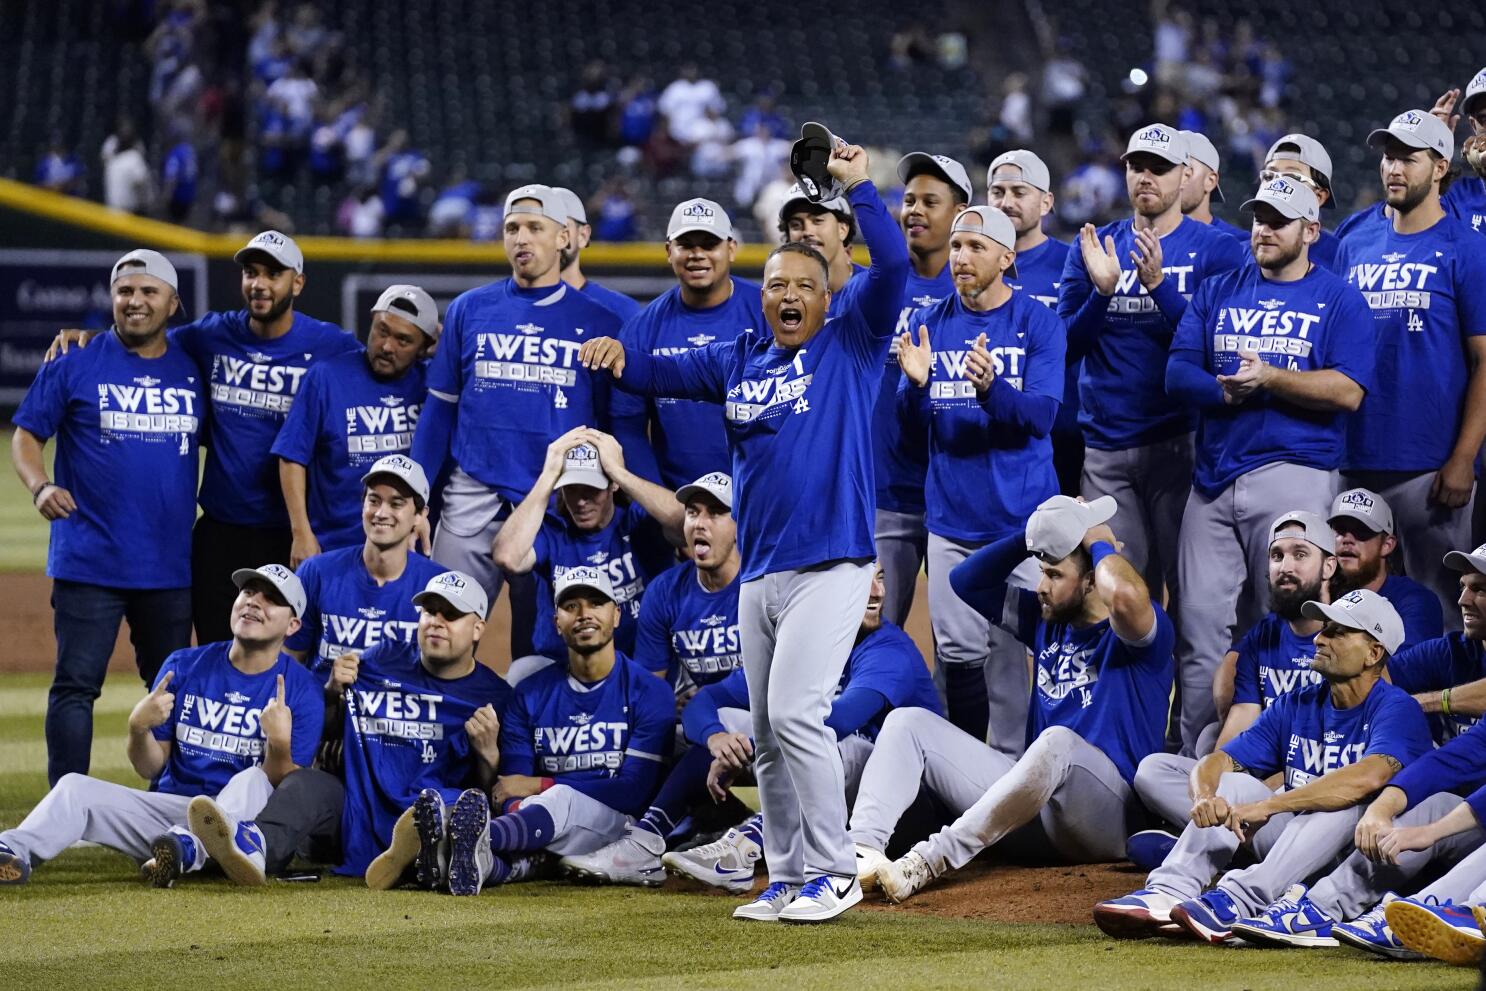 Dodgers clinch NL West division for ninth time in 10 seasons - Los